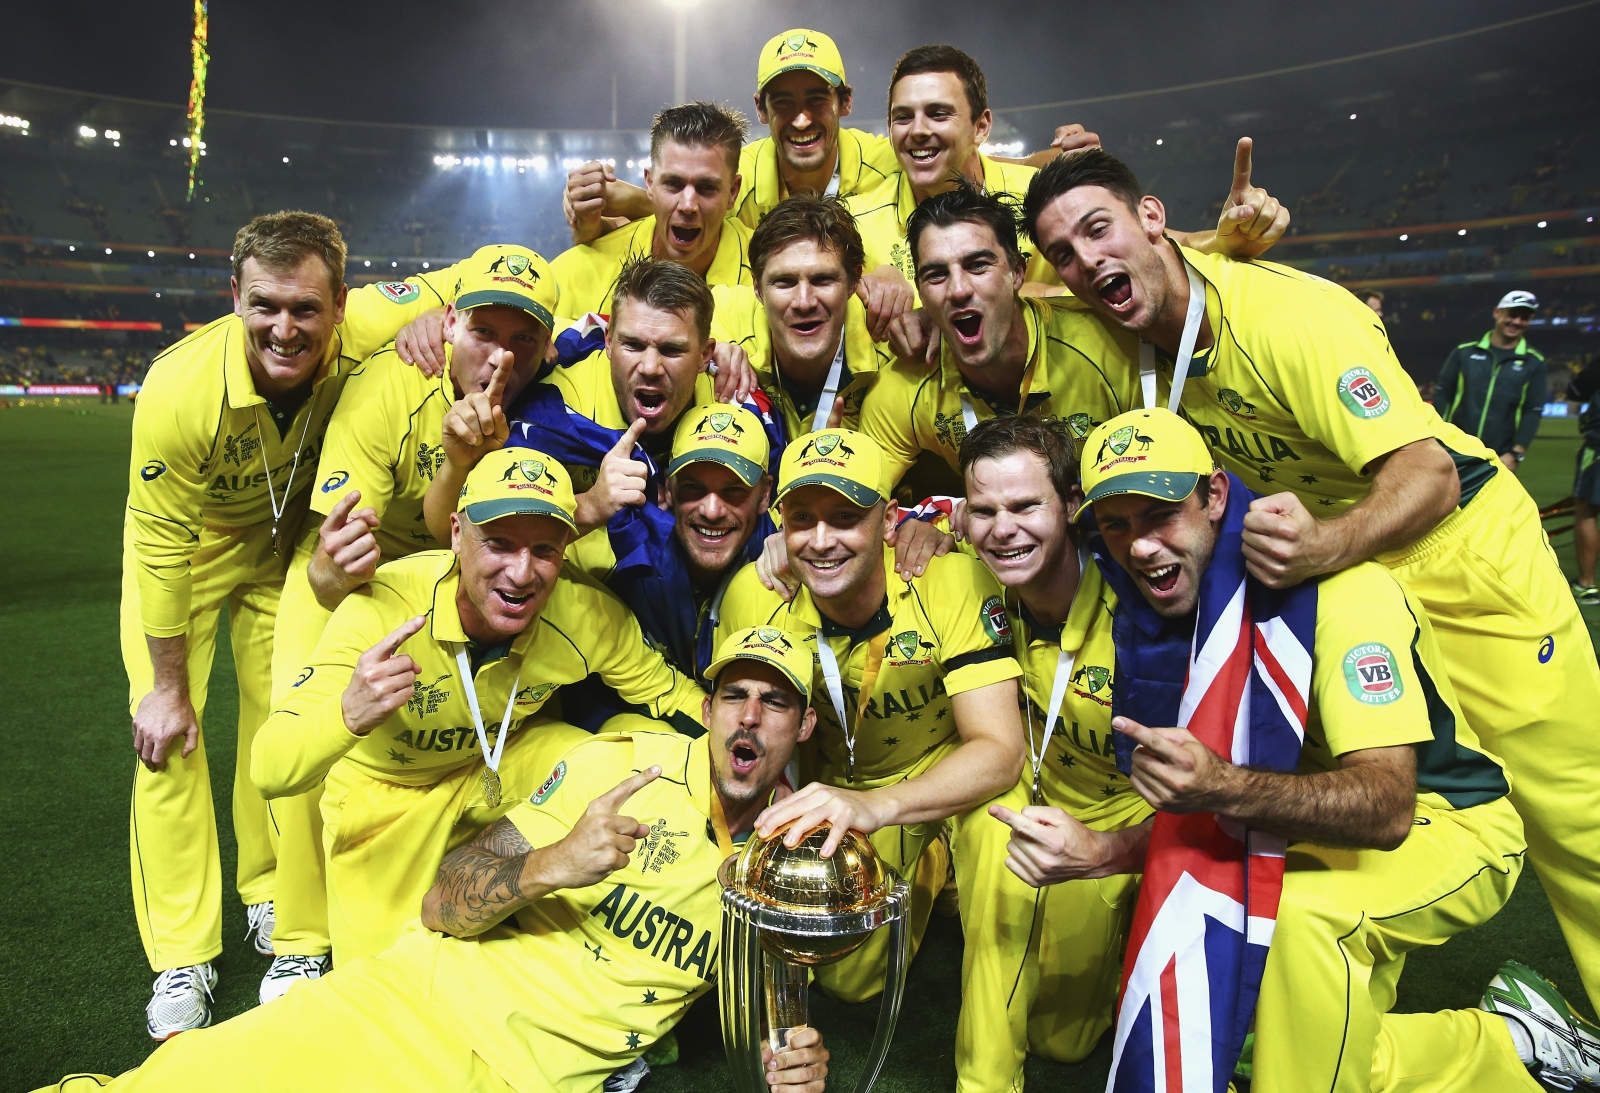 ICC Cricket World Cup 2015 Best performance, match and team of the